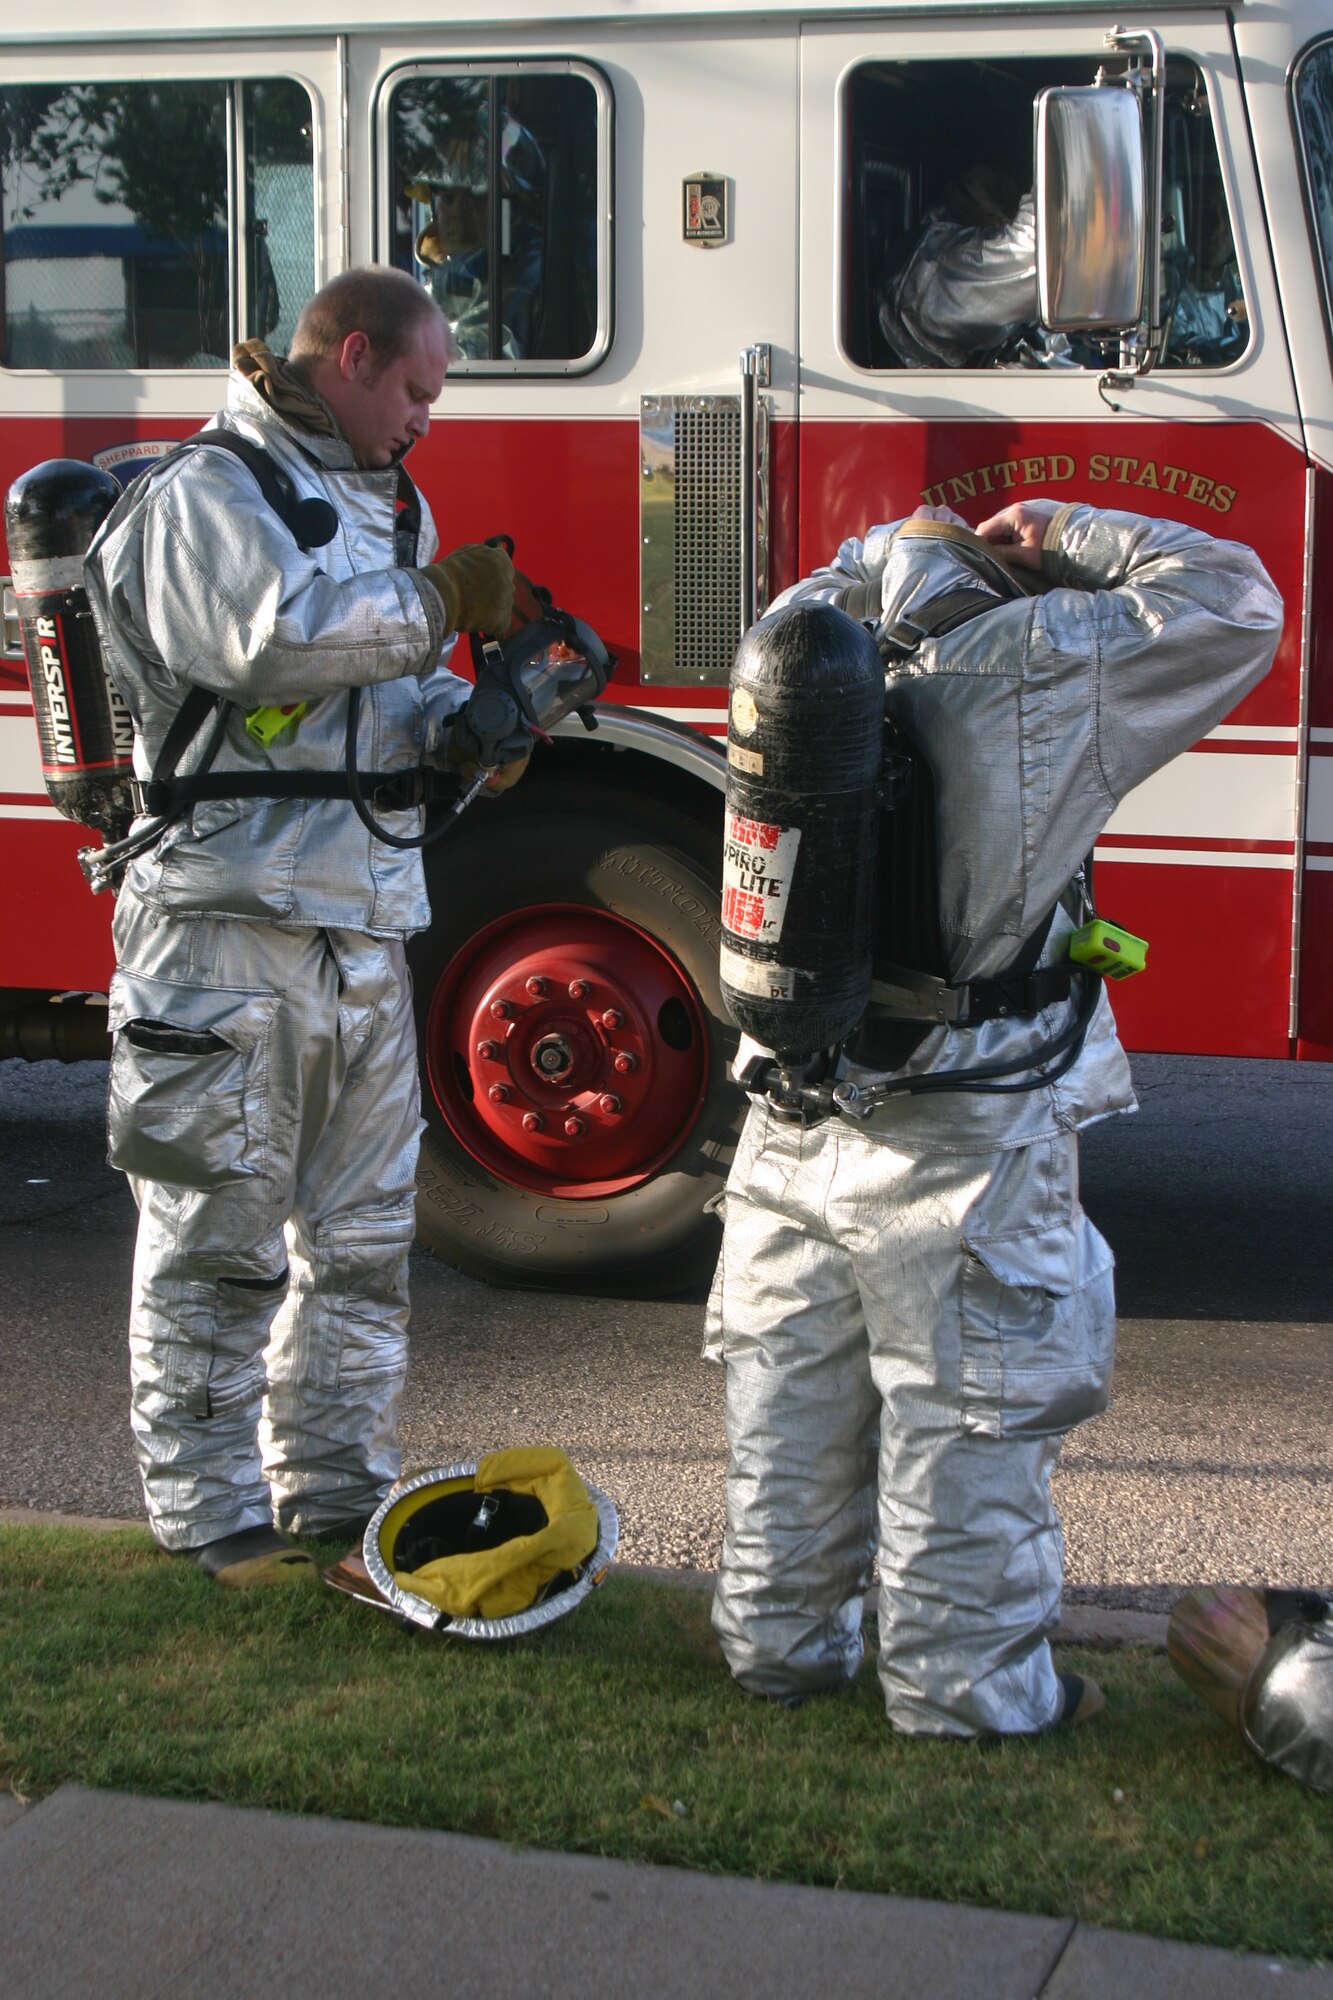 Firefighters prepare to provide assistance during an exercise Wednesday. A possible "terrorist" drove through Sheppard's hospital gate before exploding his car at the southeast corner of the ocmmunity center.  (U.S. Air Force photo/John Ingle)